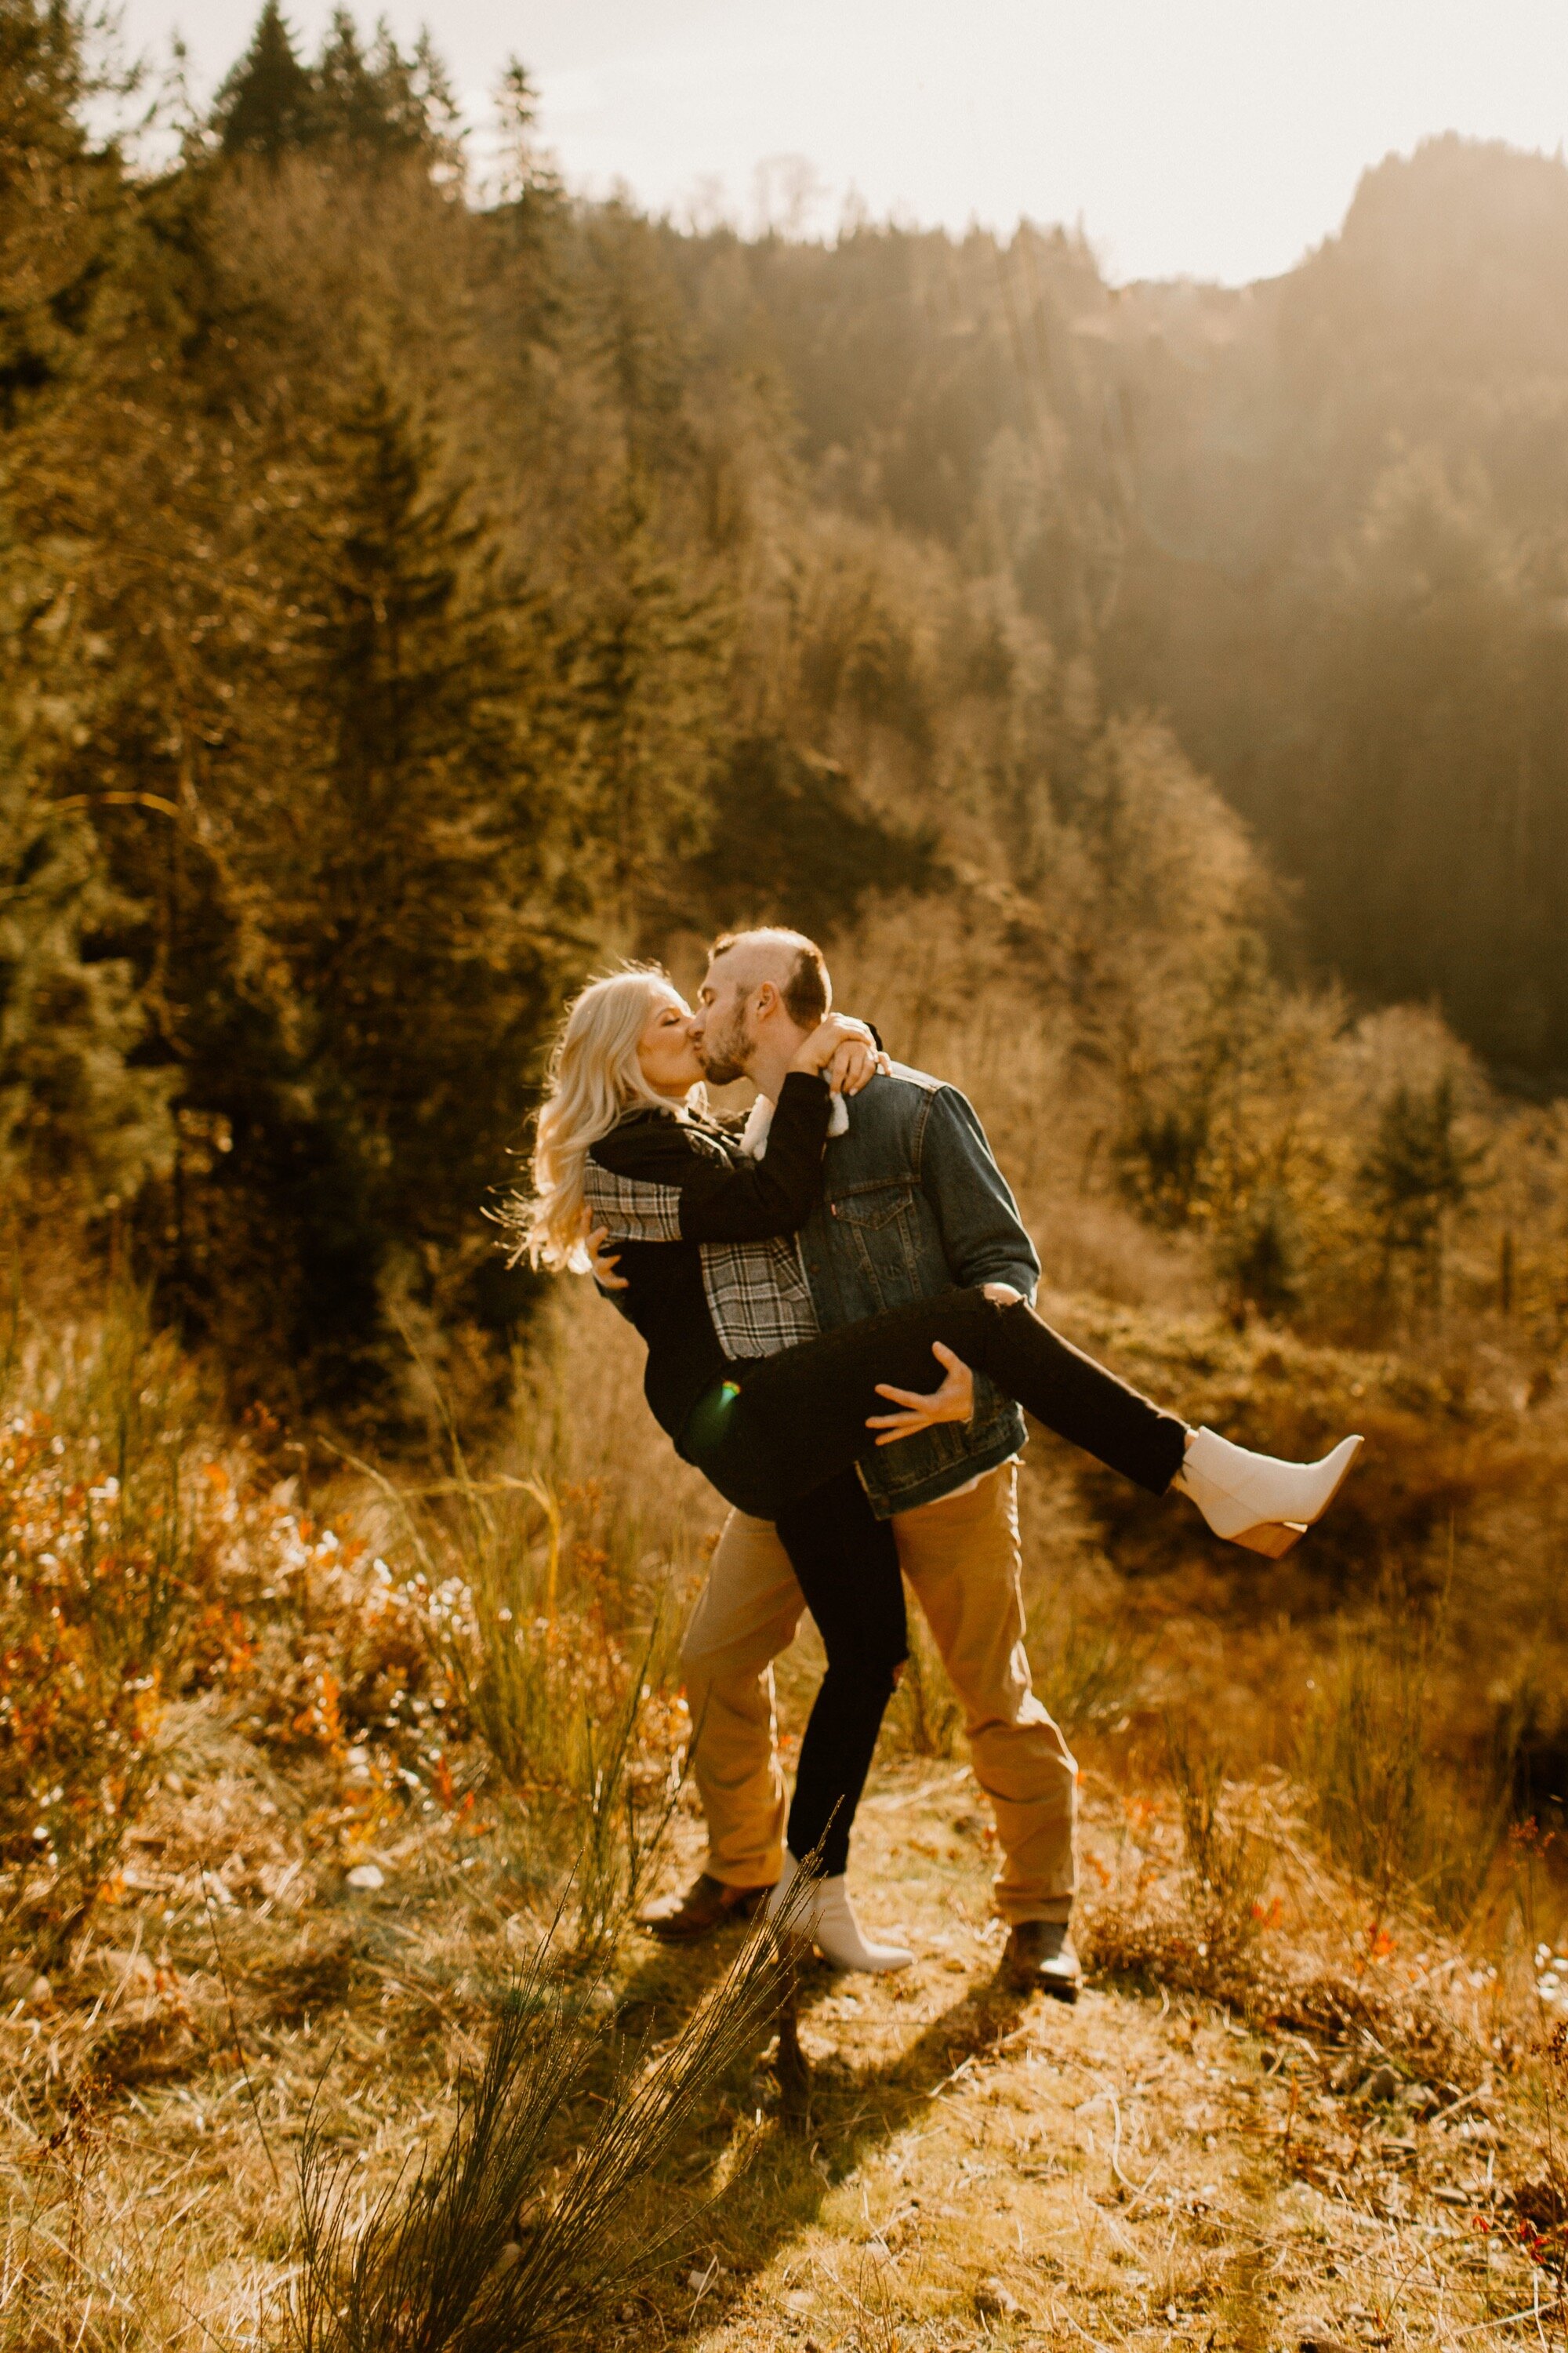 06_ginapaulson_briandtrent_engagement-78_PNW Forest Engagement Session.jpg